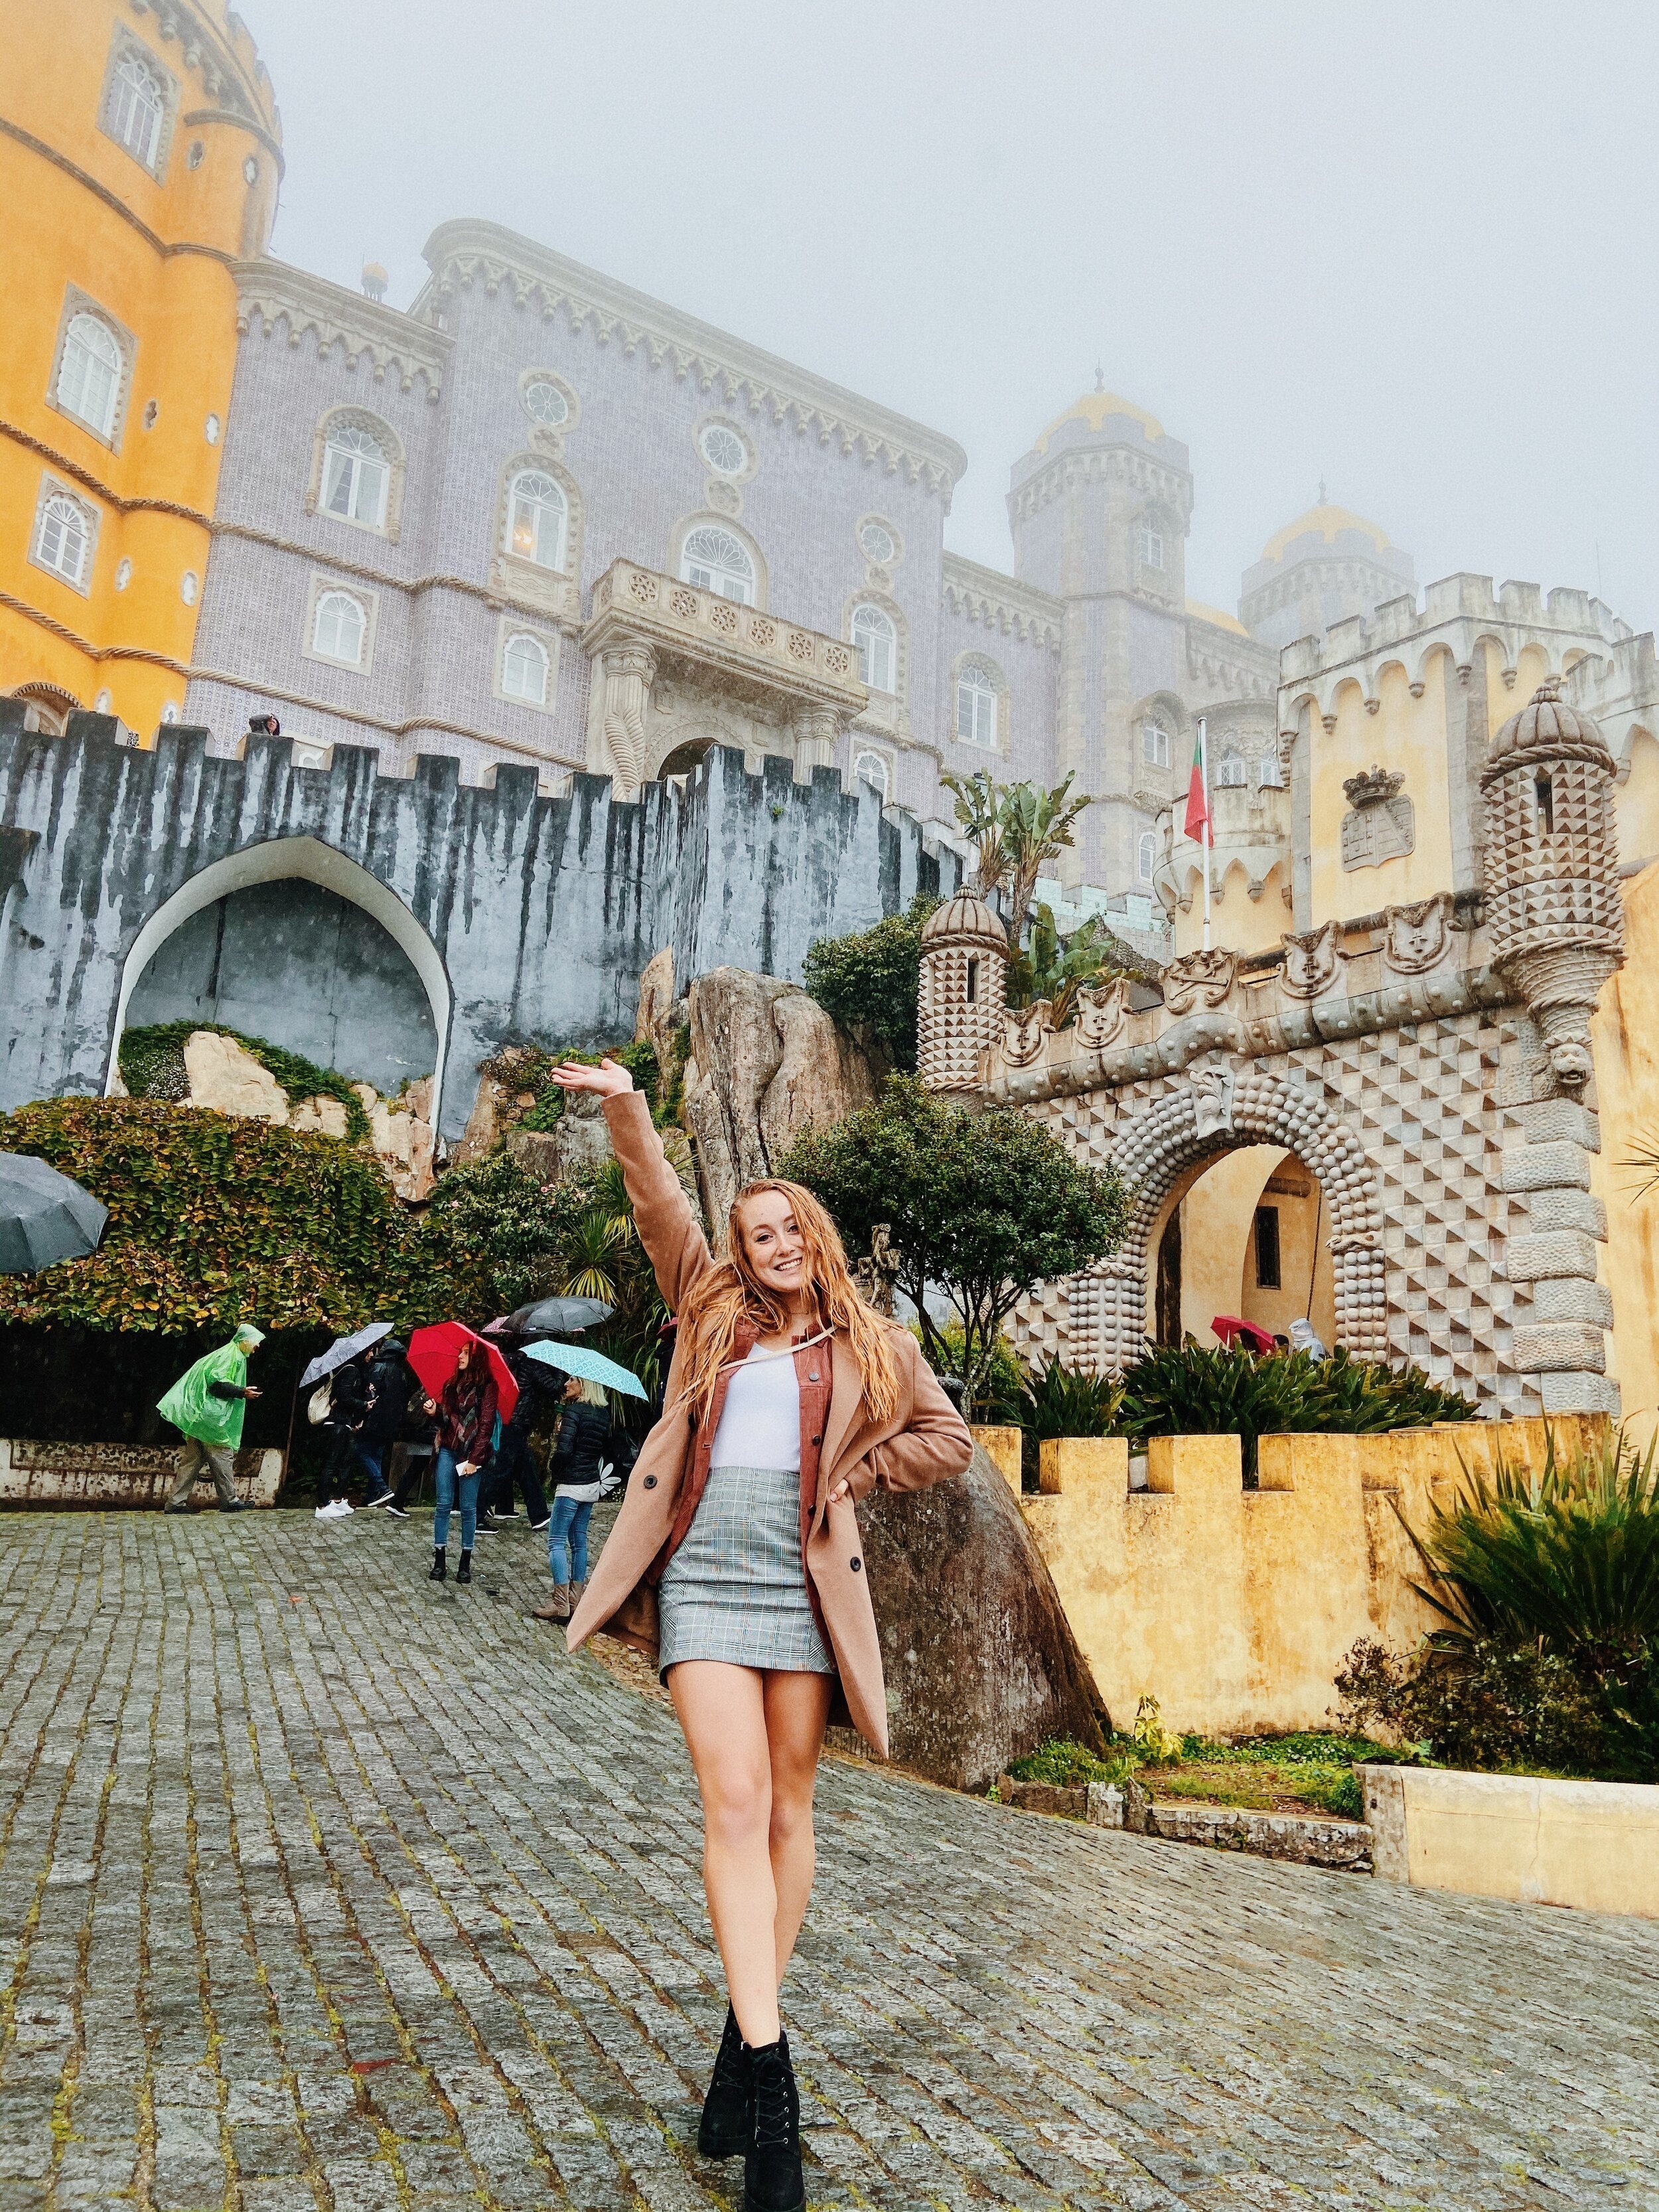 The Best 5 Places to Visit While Studying Abroad in Europe